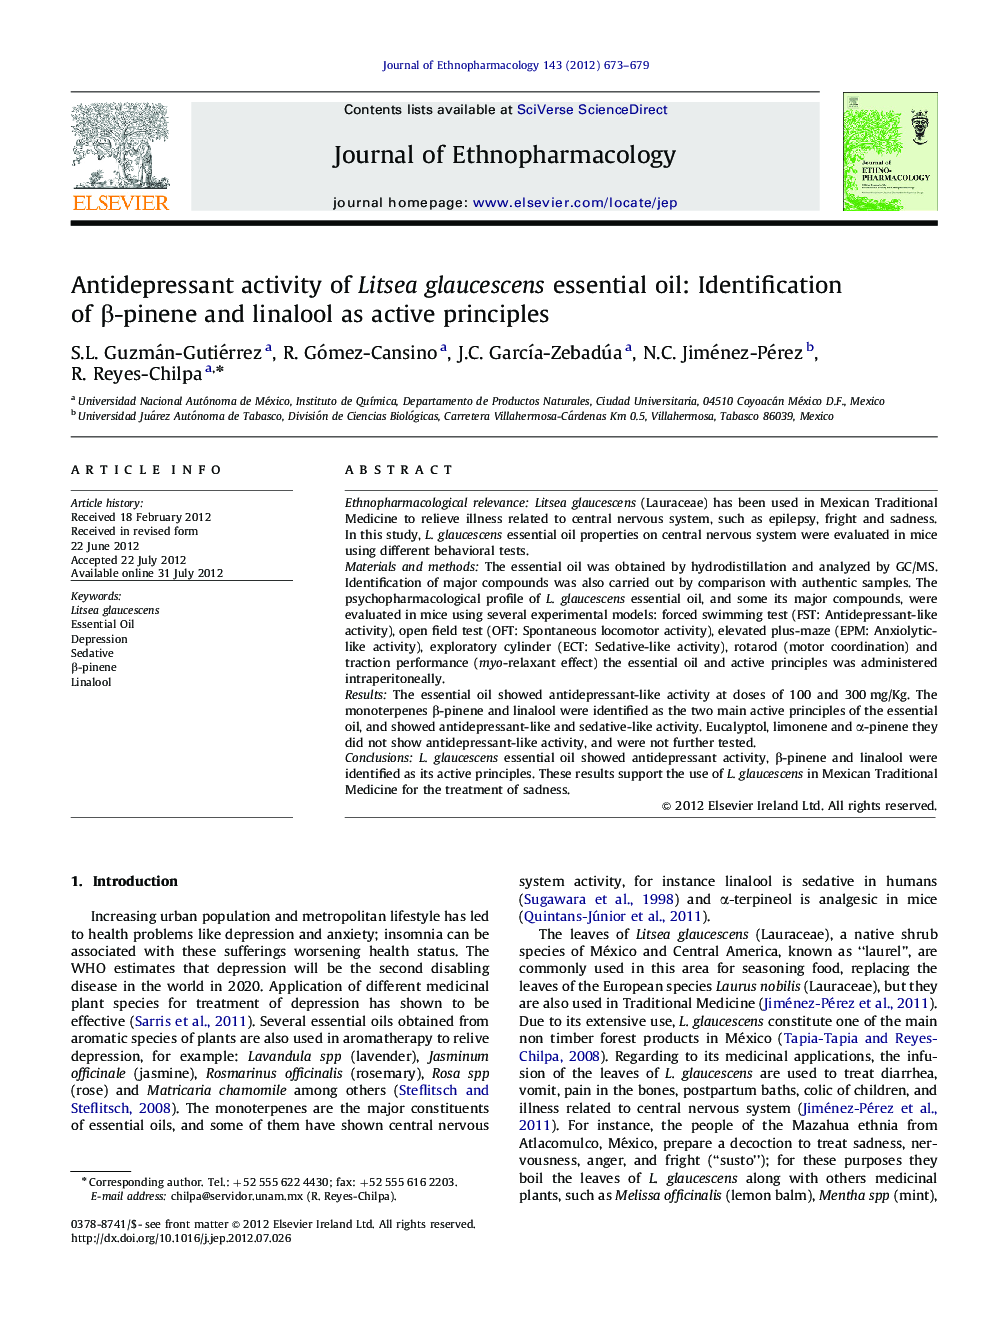 Antidepressant activity of Litsea glaucescens essential oil: Identification of Î²-pinene and linalool as active principles